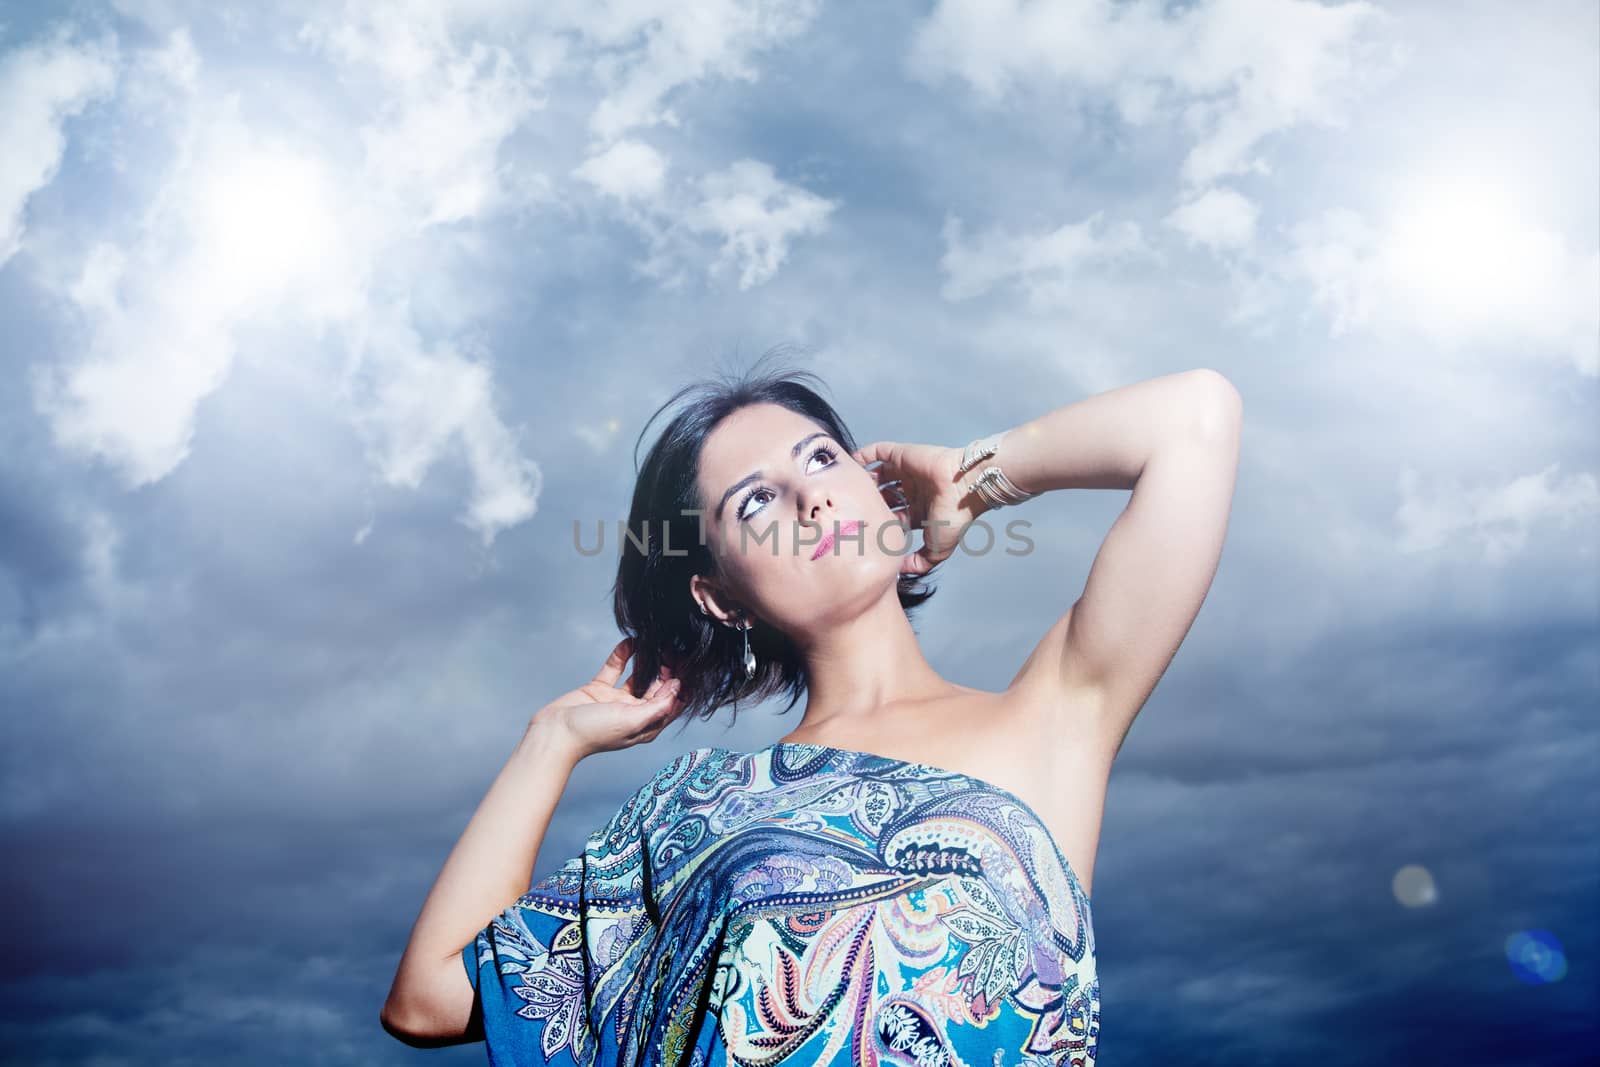 beautiful young woman on a background of sky and clouds expressing purity and freedom. Fashion